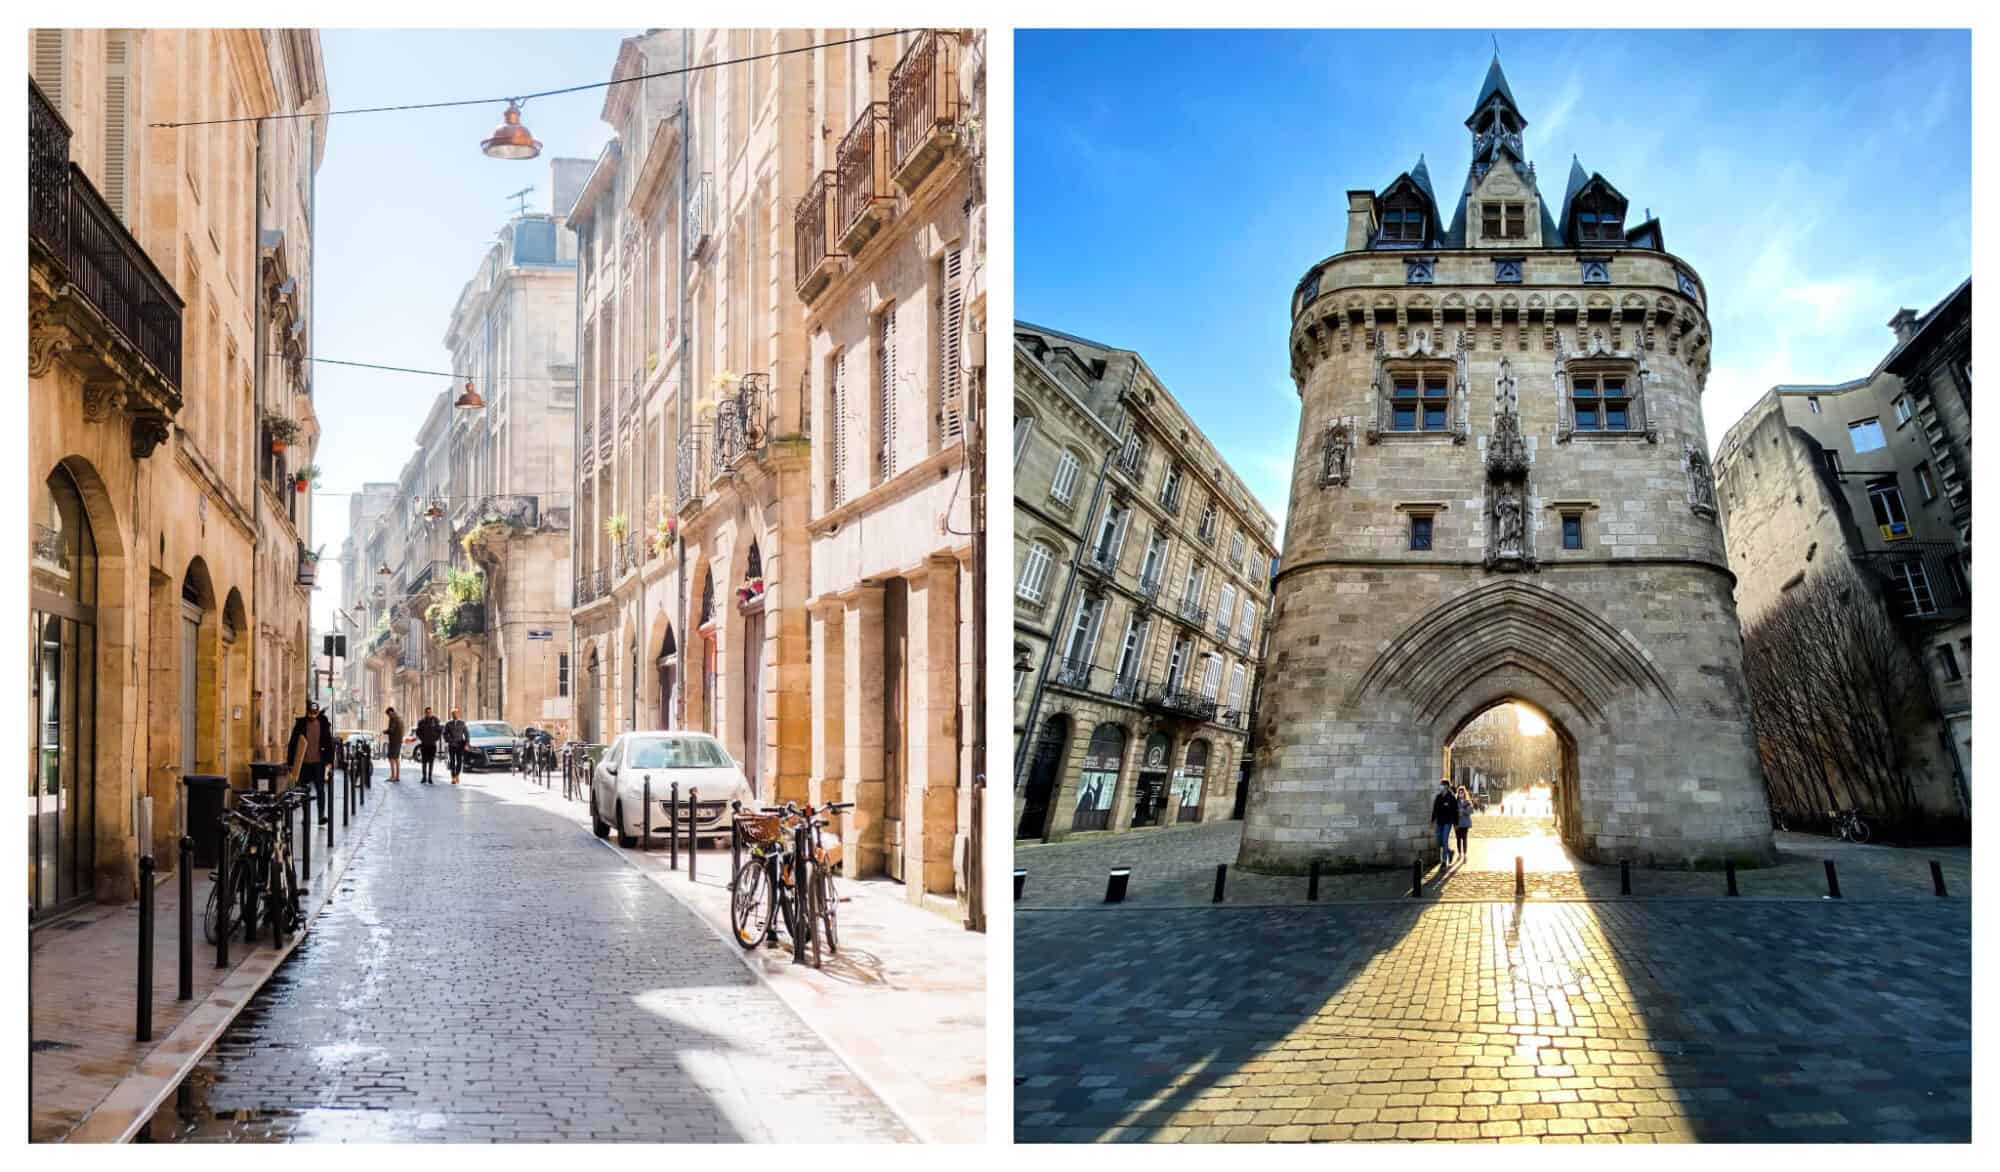 Left: A view of a sunny street in historic Bordeaux with bicycles on the sidewalks and people in the distance. Right: A view of a structure in Bordeaux's historic center with light shining through the archway and people walk through.